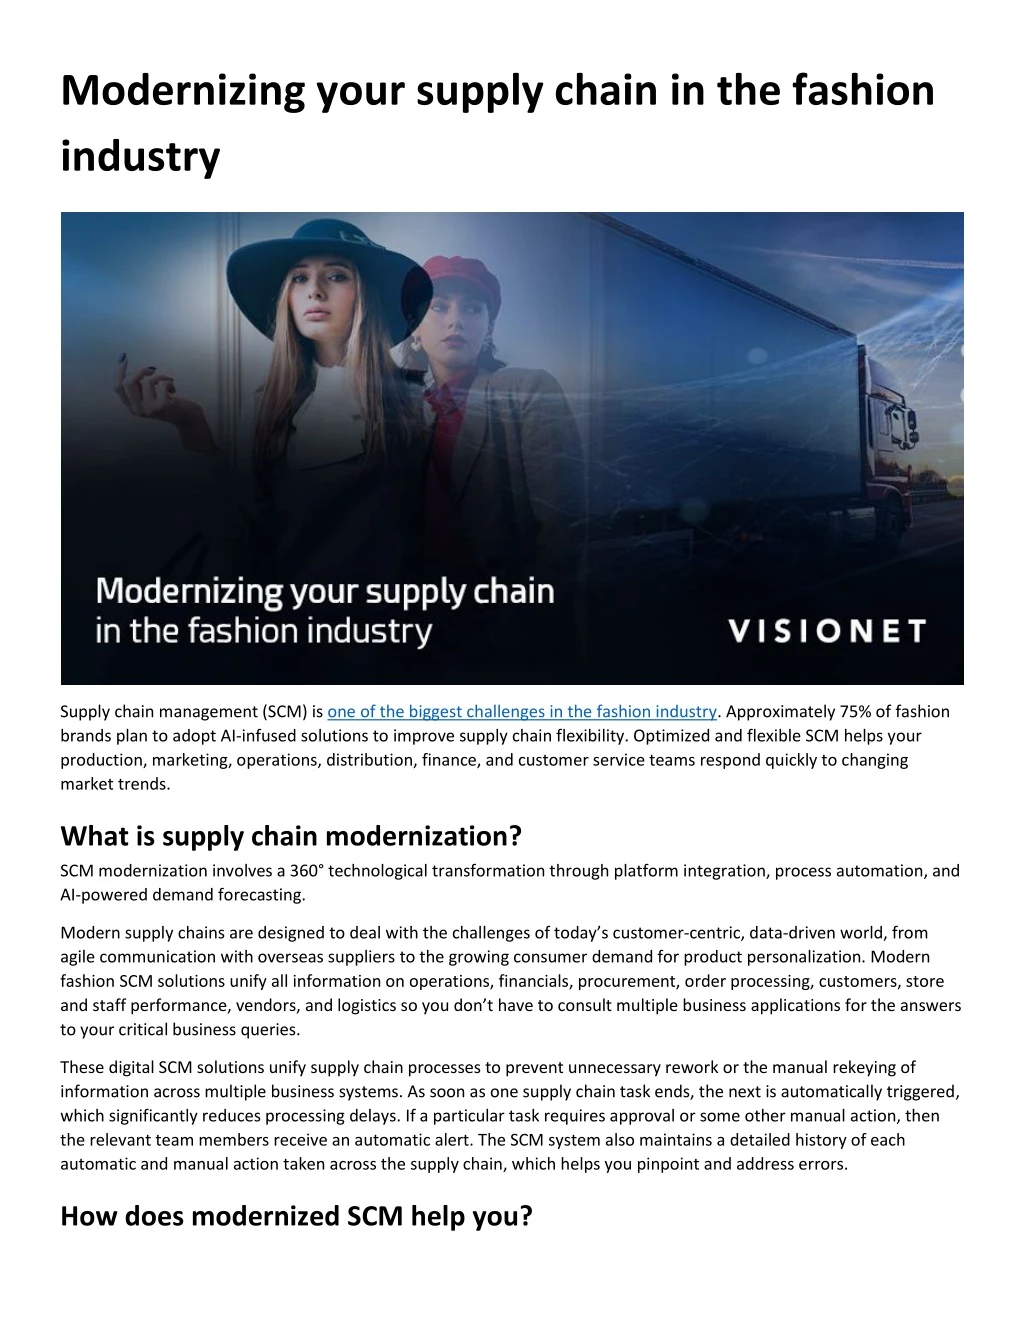 modernizing your supply chain in the fashion